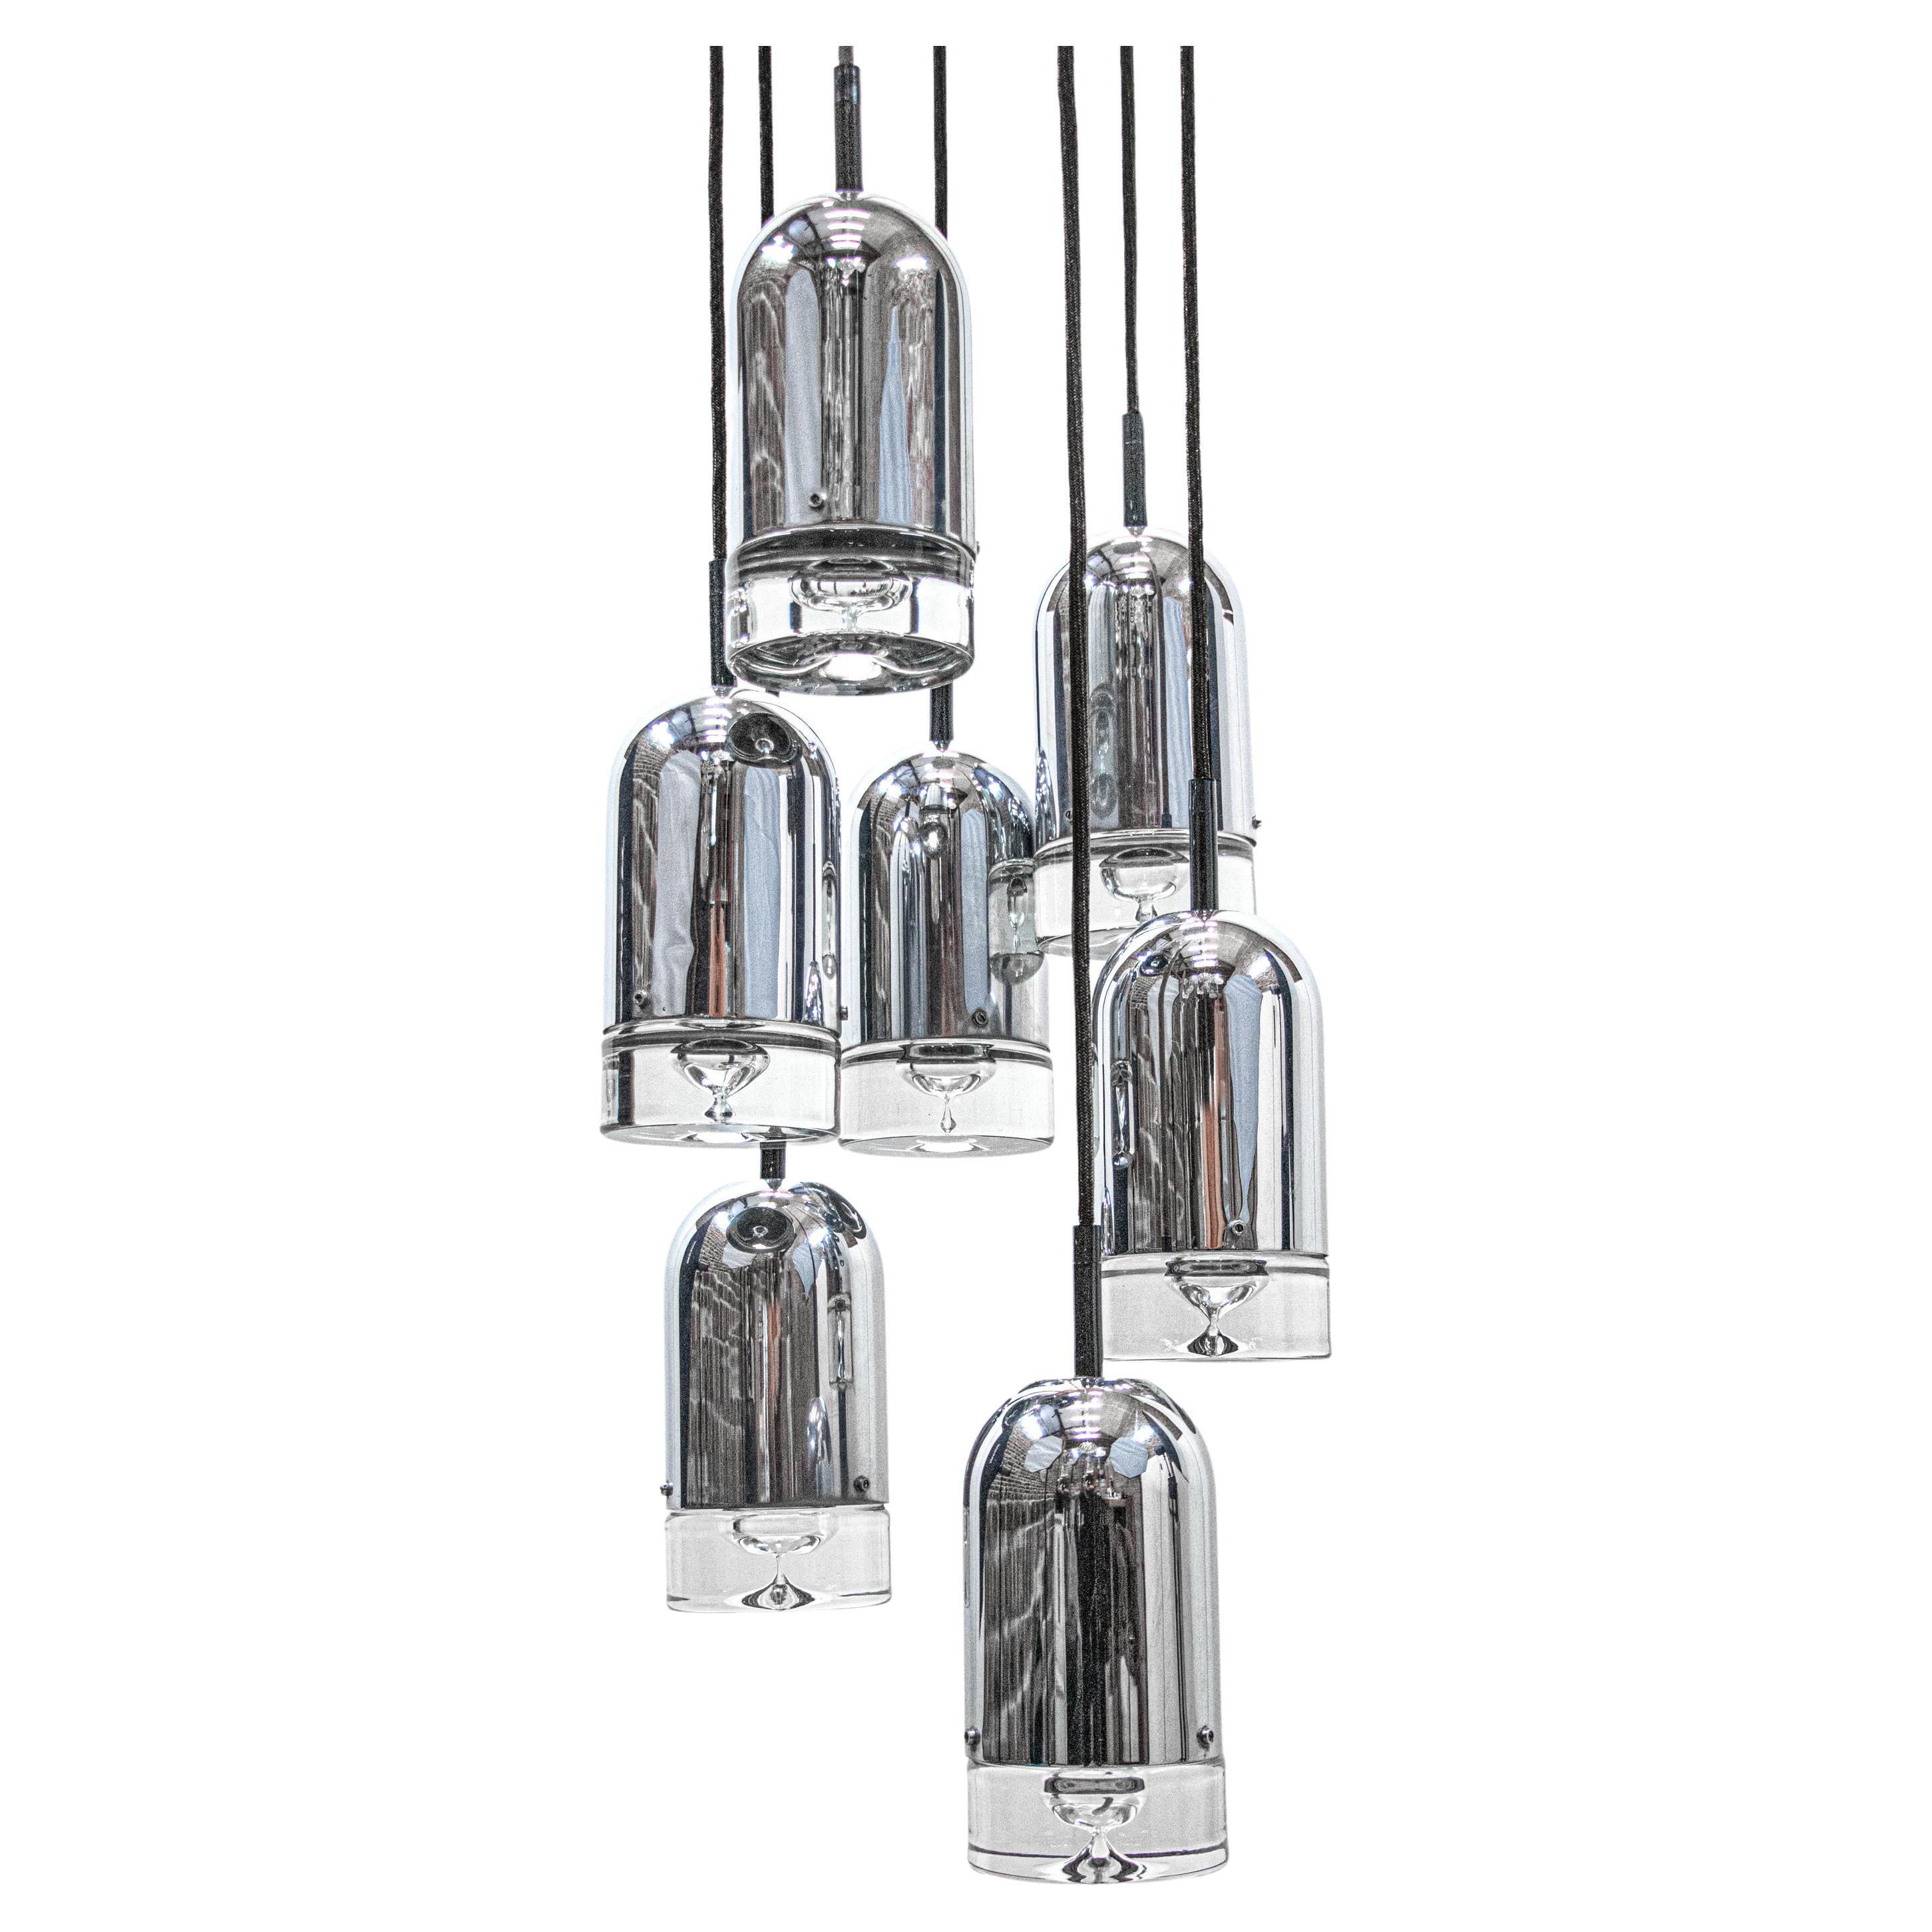 Exceptional cascading space age chandelier with seven chrome and crystal pendants. Hanging glass resembles tear drops. Heavy duty. Has 7 sockets. Height adjustable. In very good condition. Gives beautiful light. Amazing mid century design. Gem from